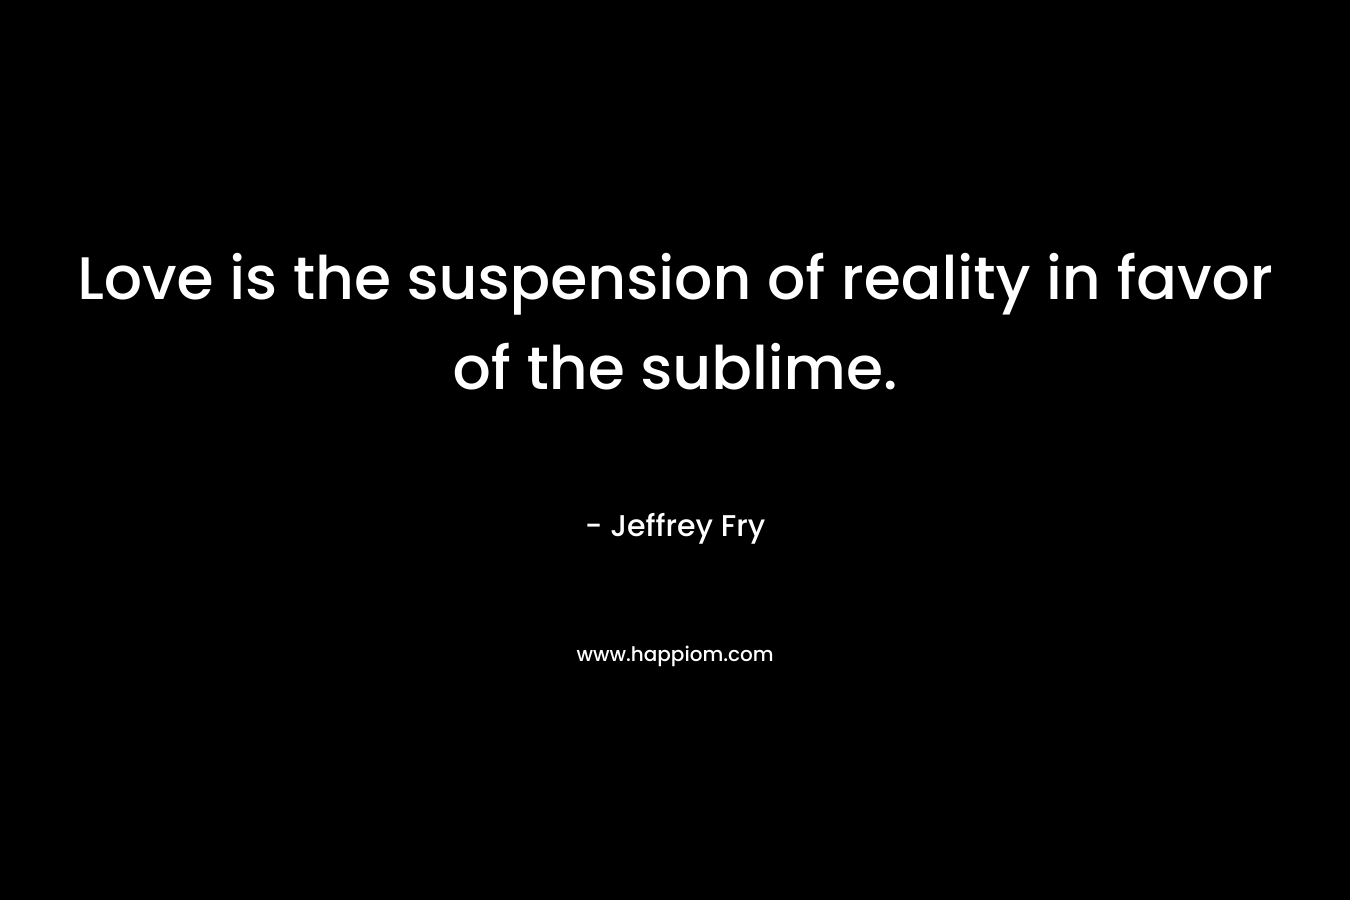 Love is the suspension of reality in favor of the sublime. – Jeffrey Fry